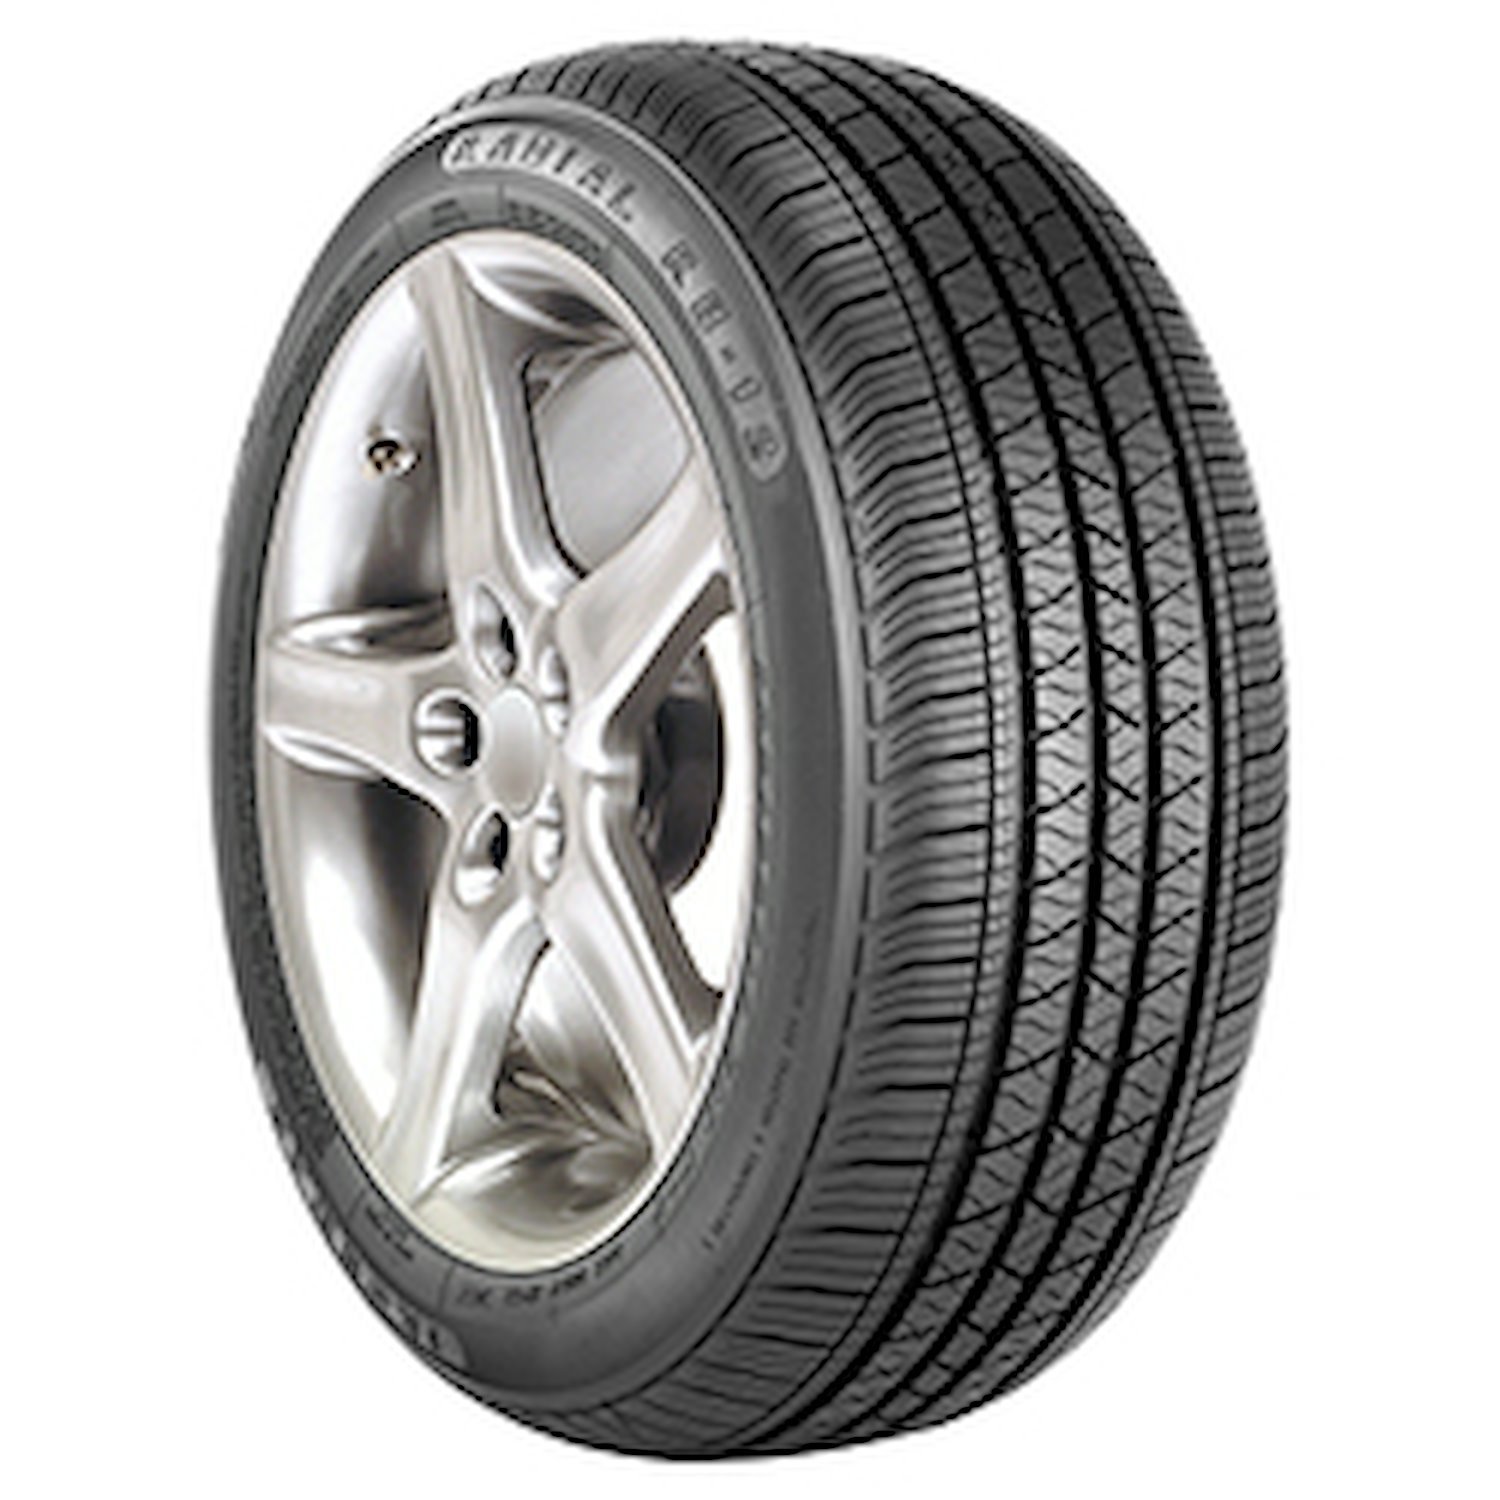 RB-12 Tire, 225/60R16 98T